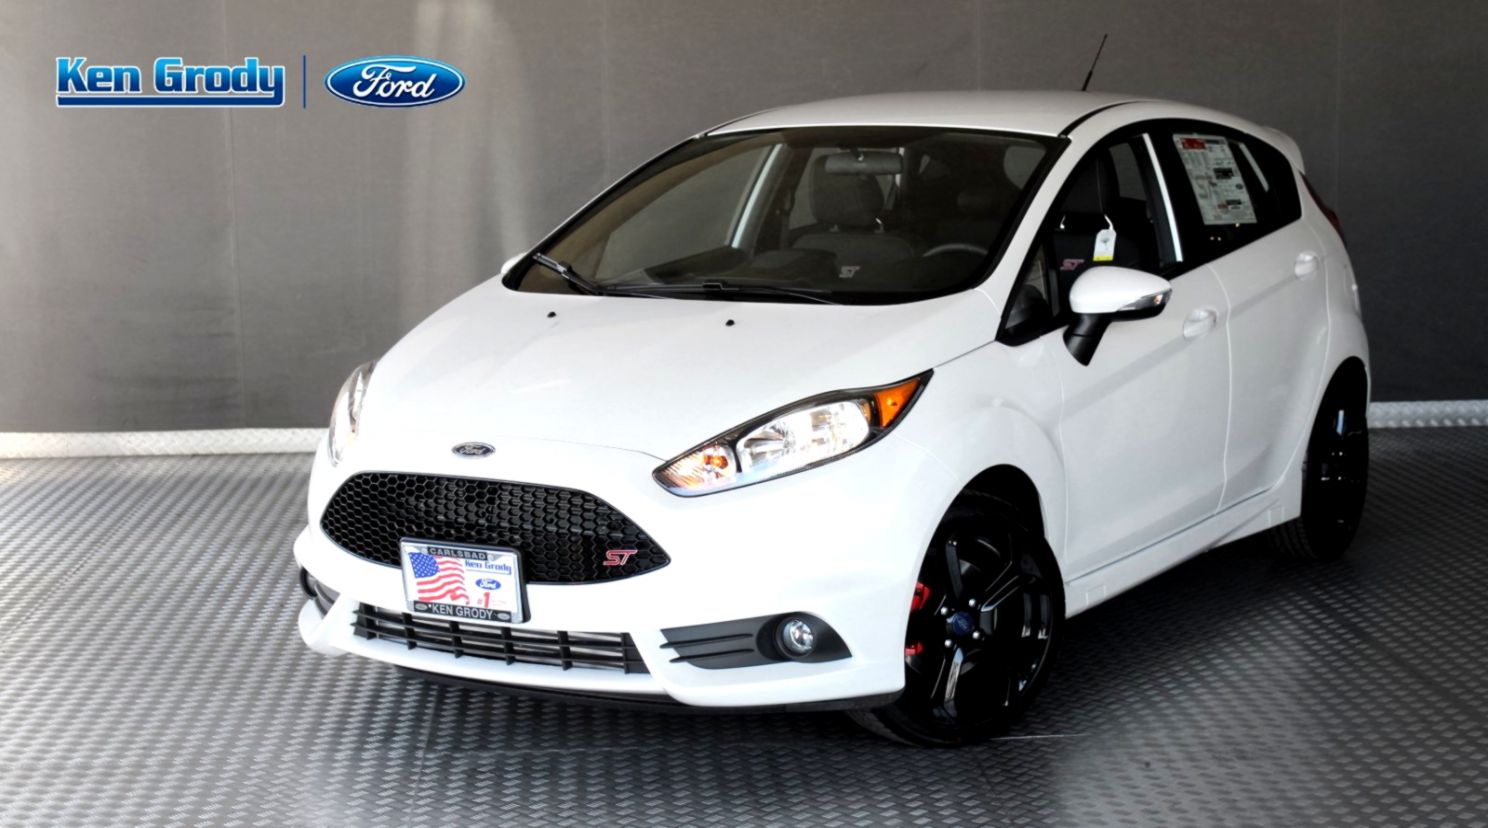 New 2019 Ford Fiesta St Hatchback In Buena Park 15273 - 2019 Ford Fiesta St , HD Wallpaper & Backgrounds